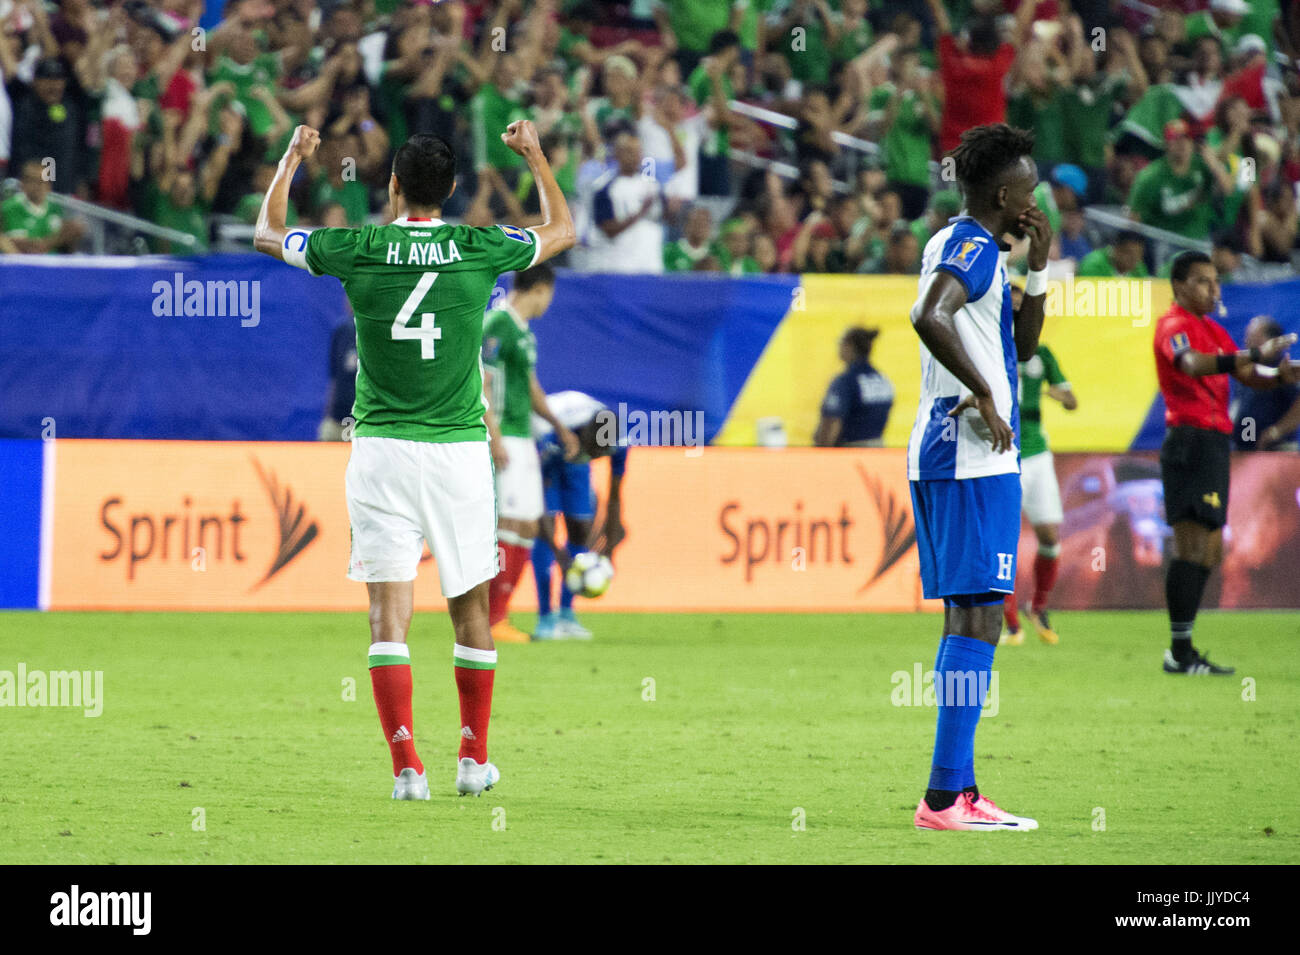 Glendale, Arizona, USA. 20th July, 2017. Mexico's HUGO AYALA (4) raise his arms after winning against Honduras Thursday, July 20, 2017, during the 2017 Gold Cup Quarterfinals at University of Phoenix Stadium in Glendale, Arizona. Mexico won 1-0 against Honduras to advance to the 2017 Gold Cup Semifinals. Credit: Jeff Brown/ZUMA Wire/Alamy Live News Stock Photo